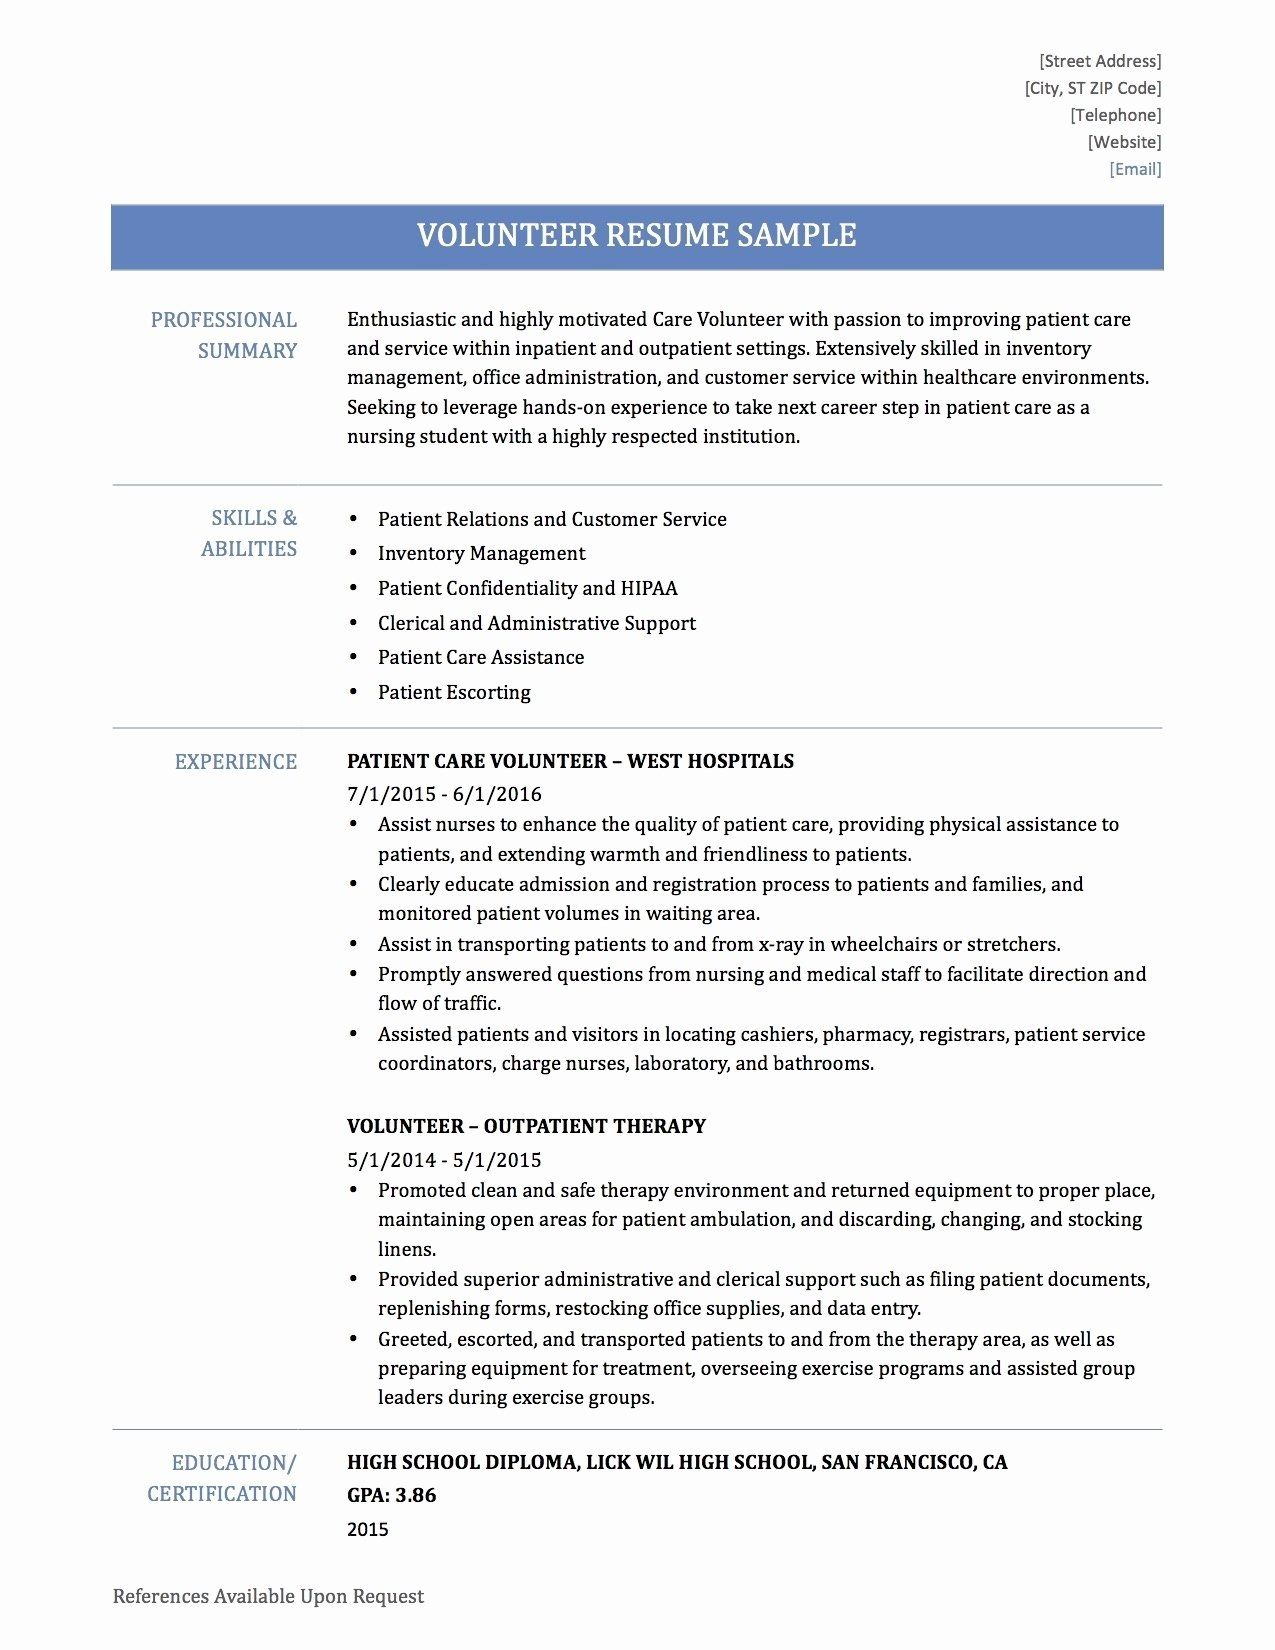 Volunteer Resume Examples Job Cover Letter Resume Design intended for dimensions 1275 X 1650